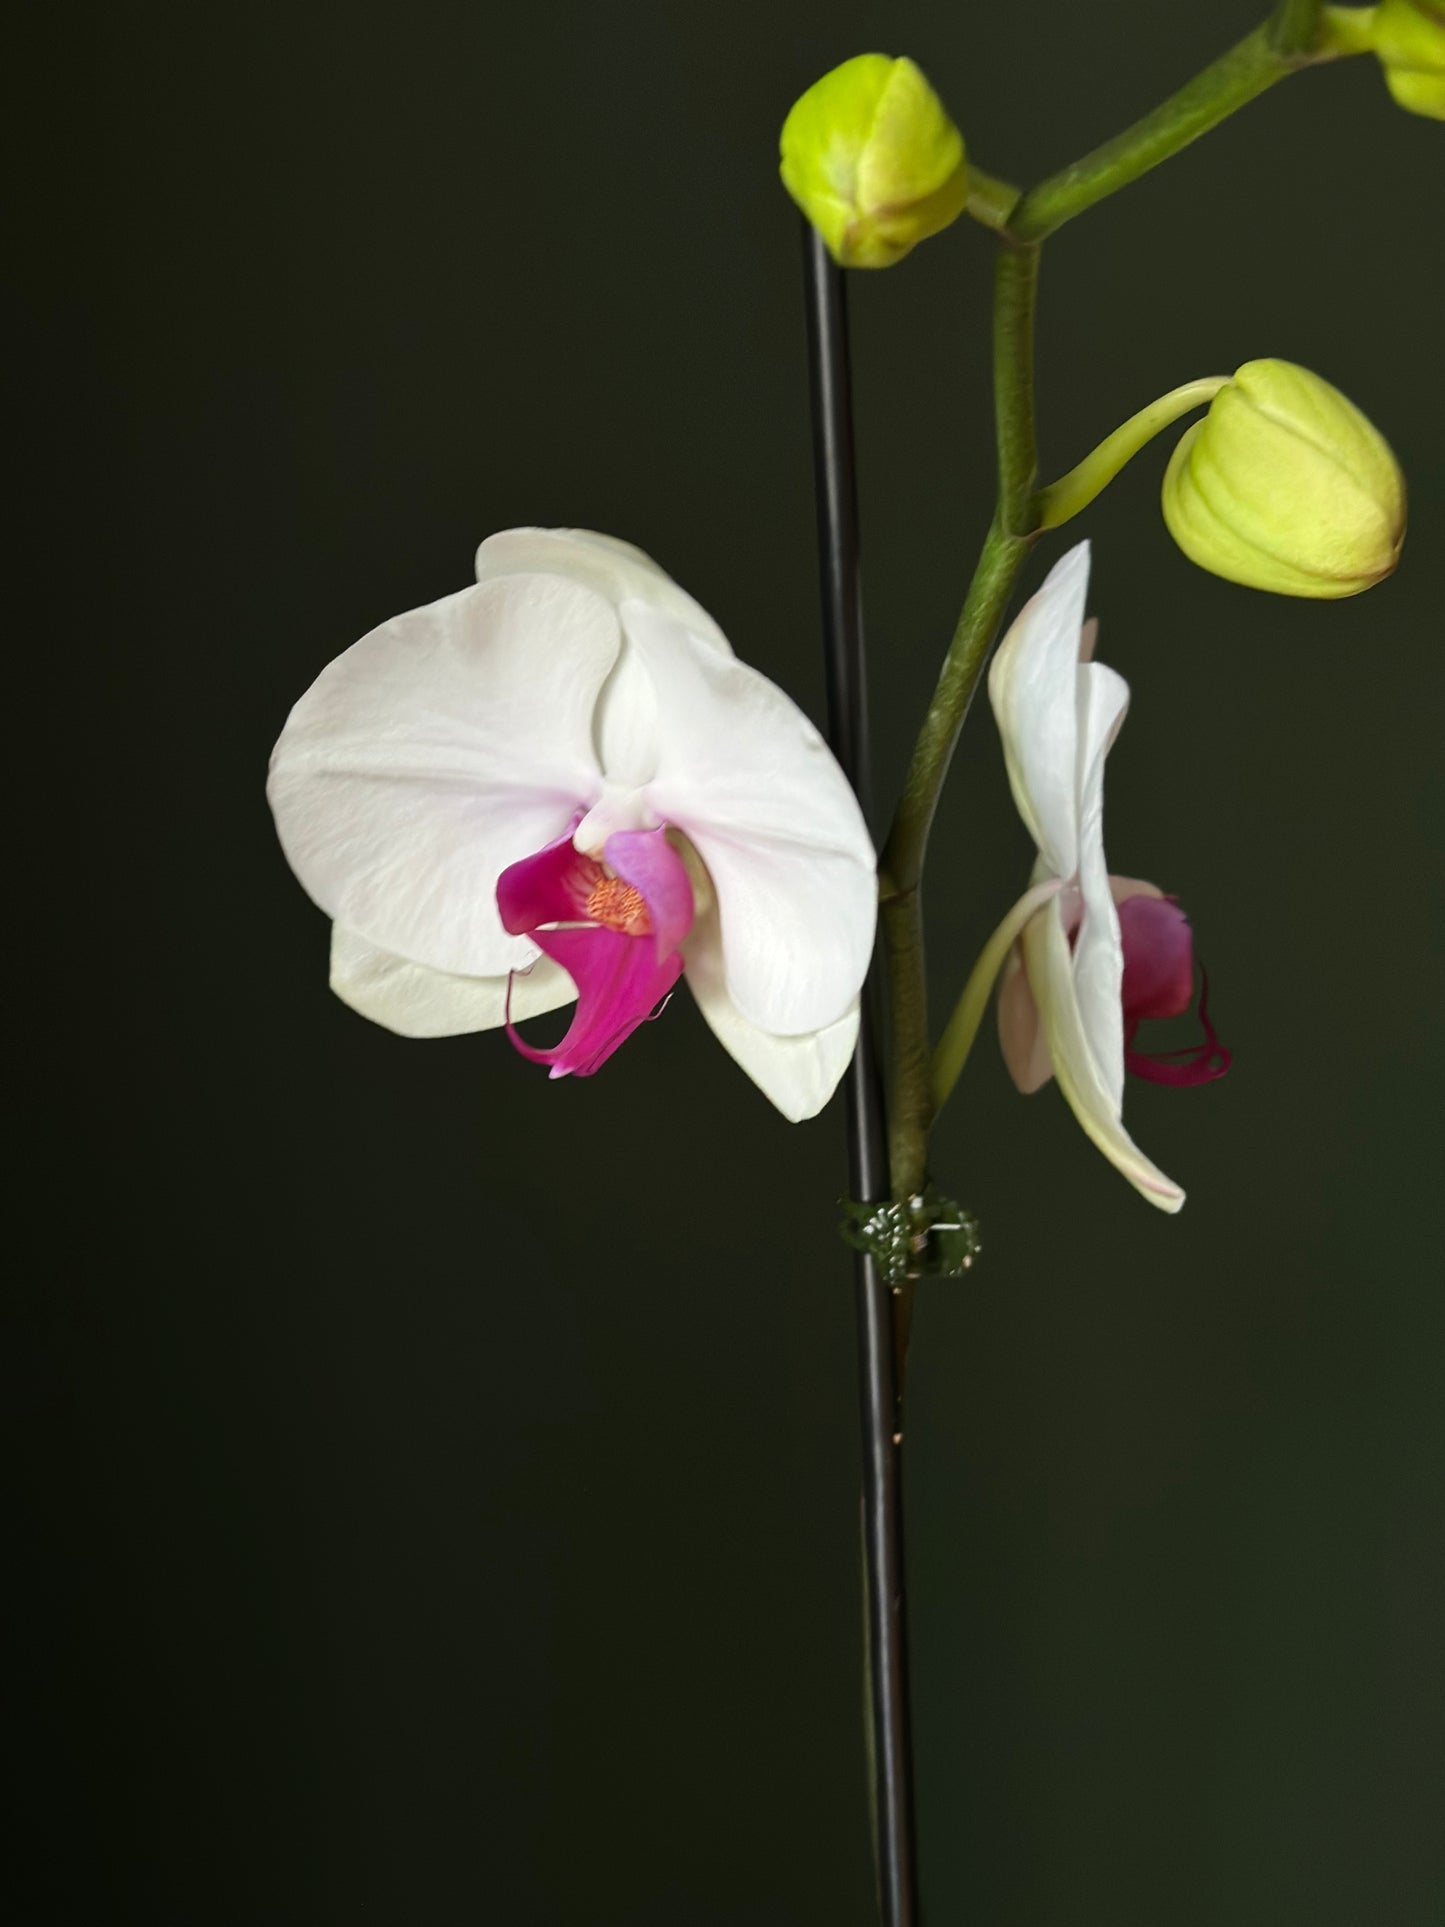 The Orchid Love